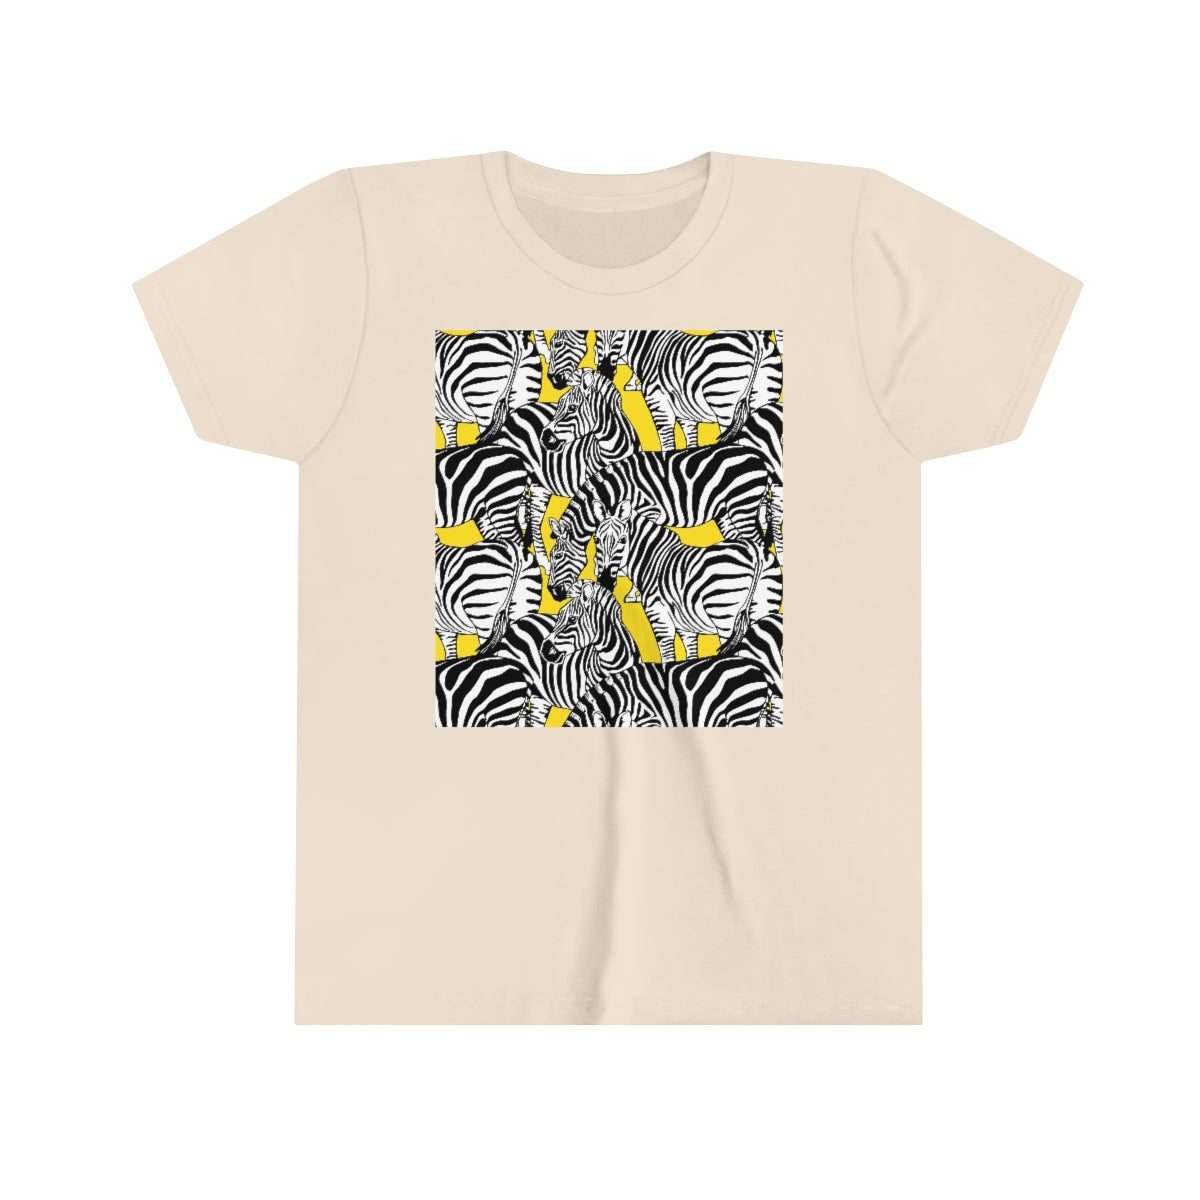 Youth Short Sleeve Tee "Colorful zebras"